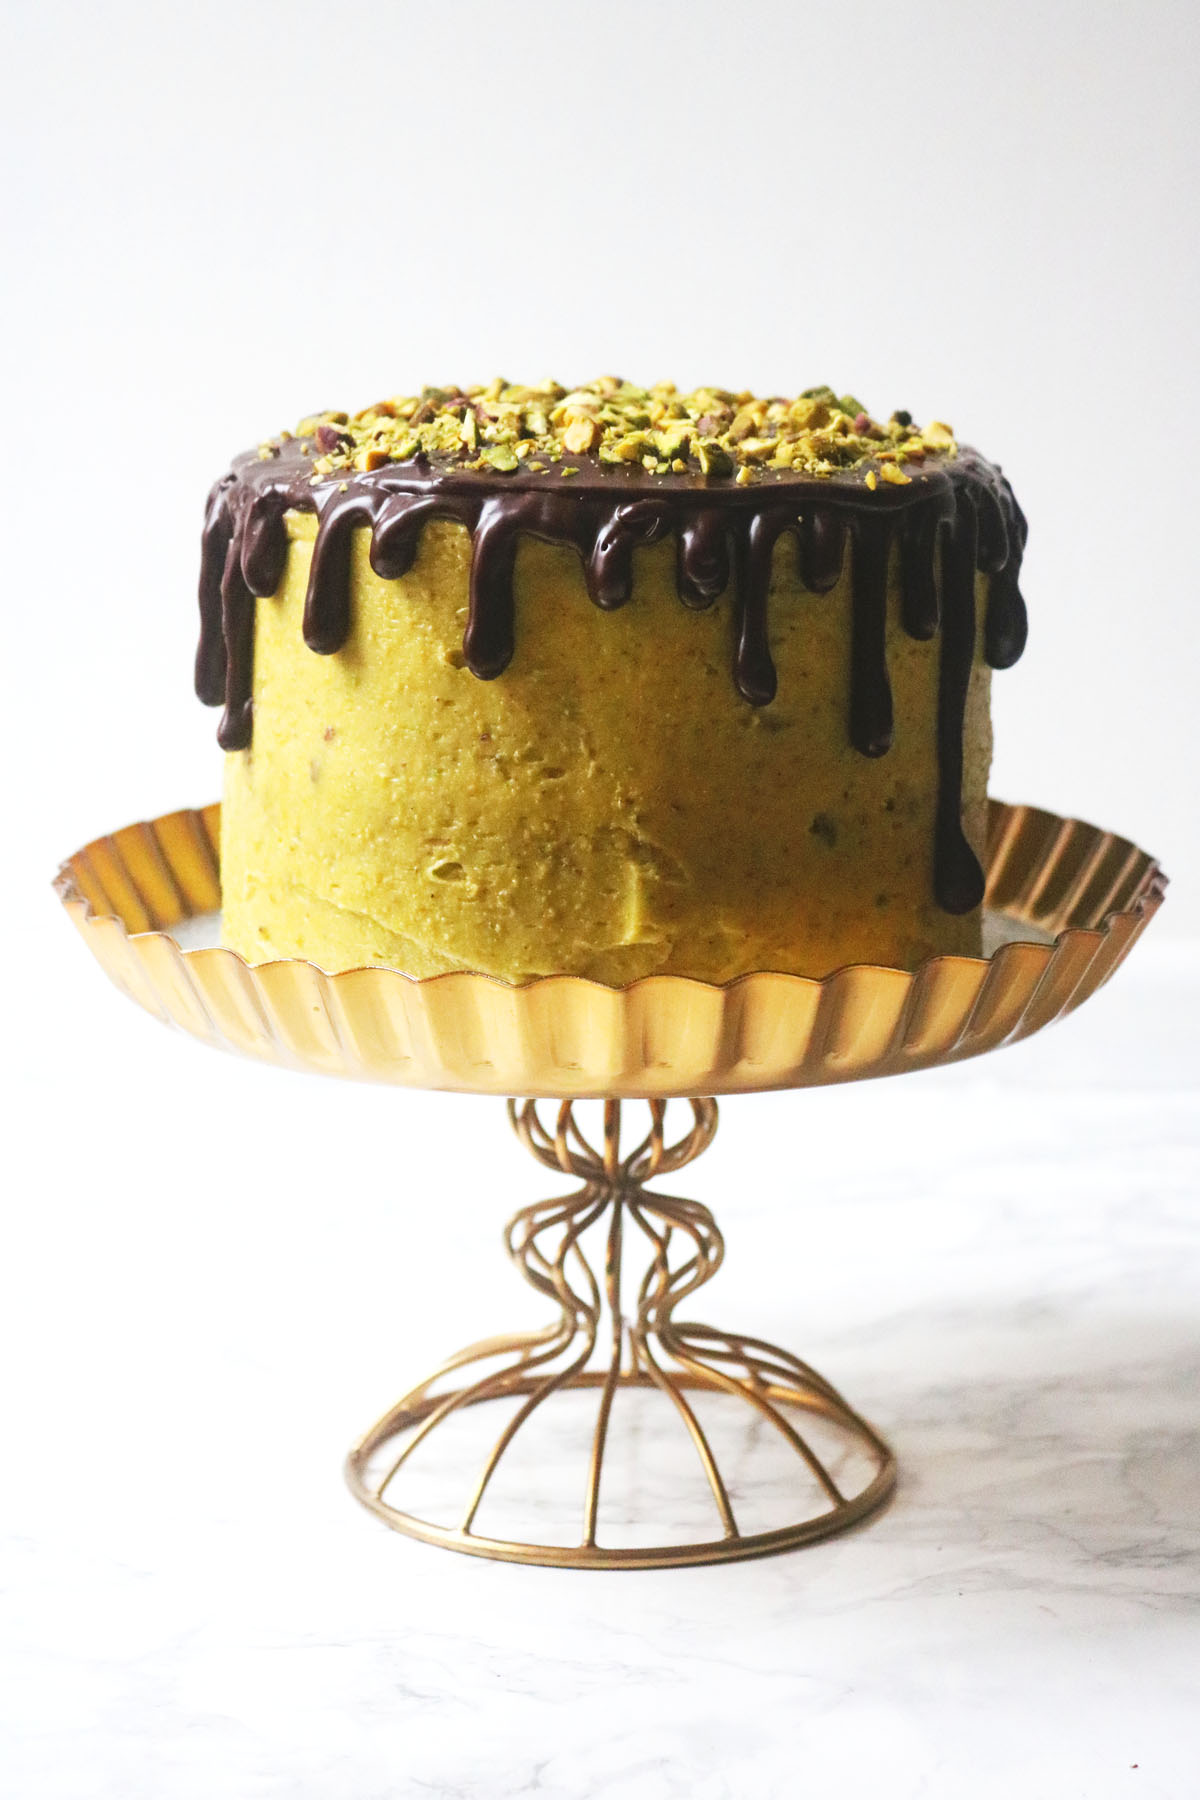 Chocolate and Pistachio Cake on a gold cake stand